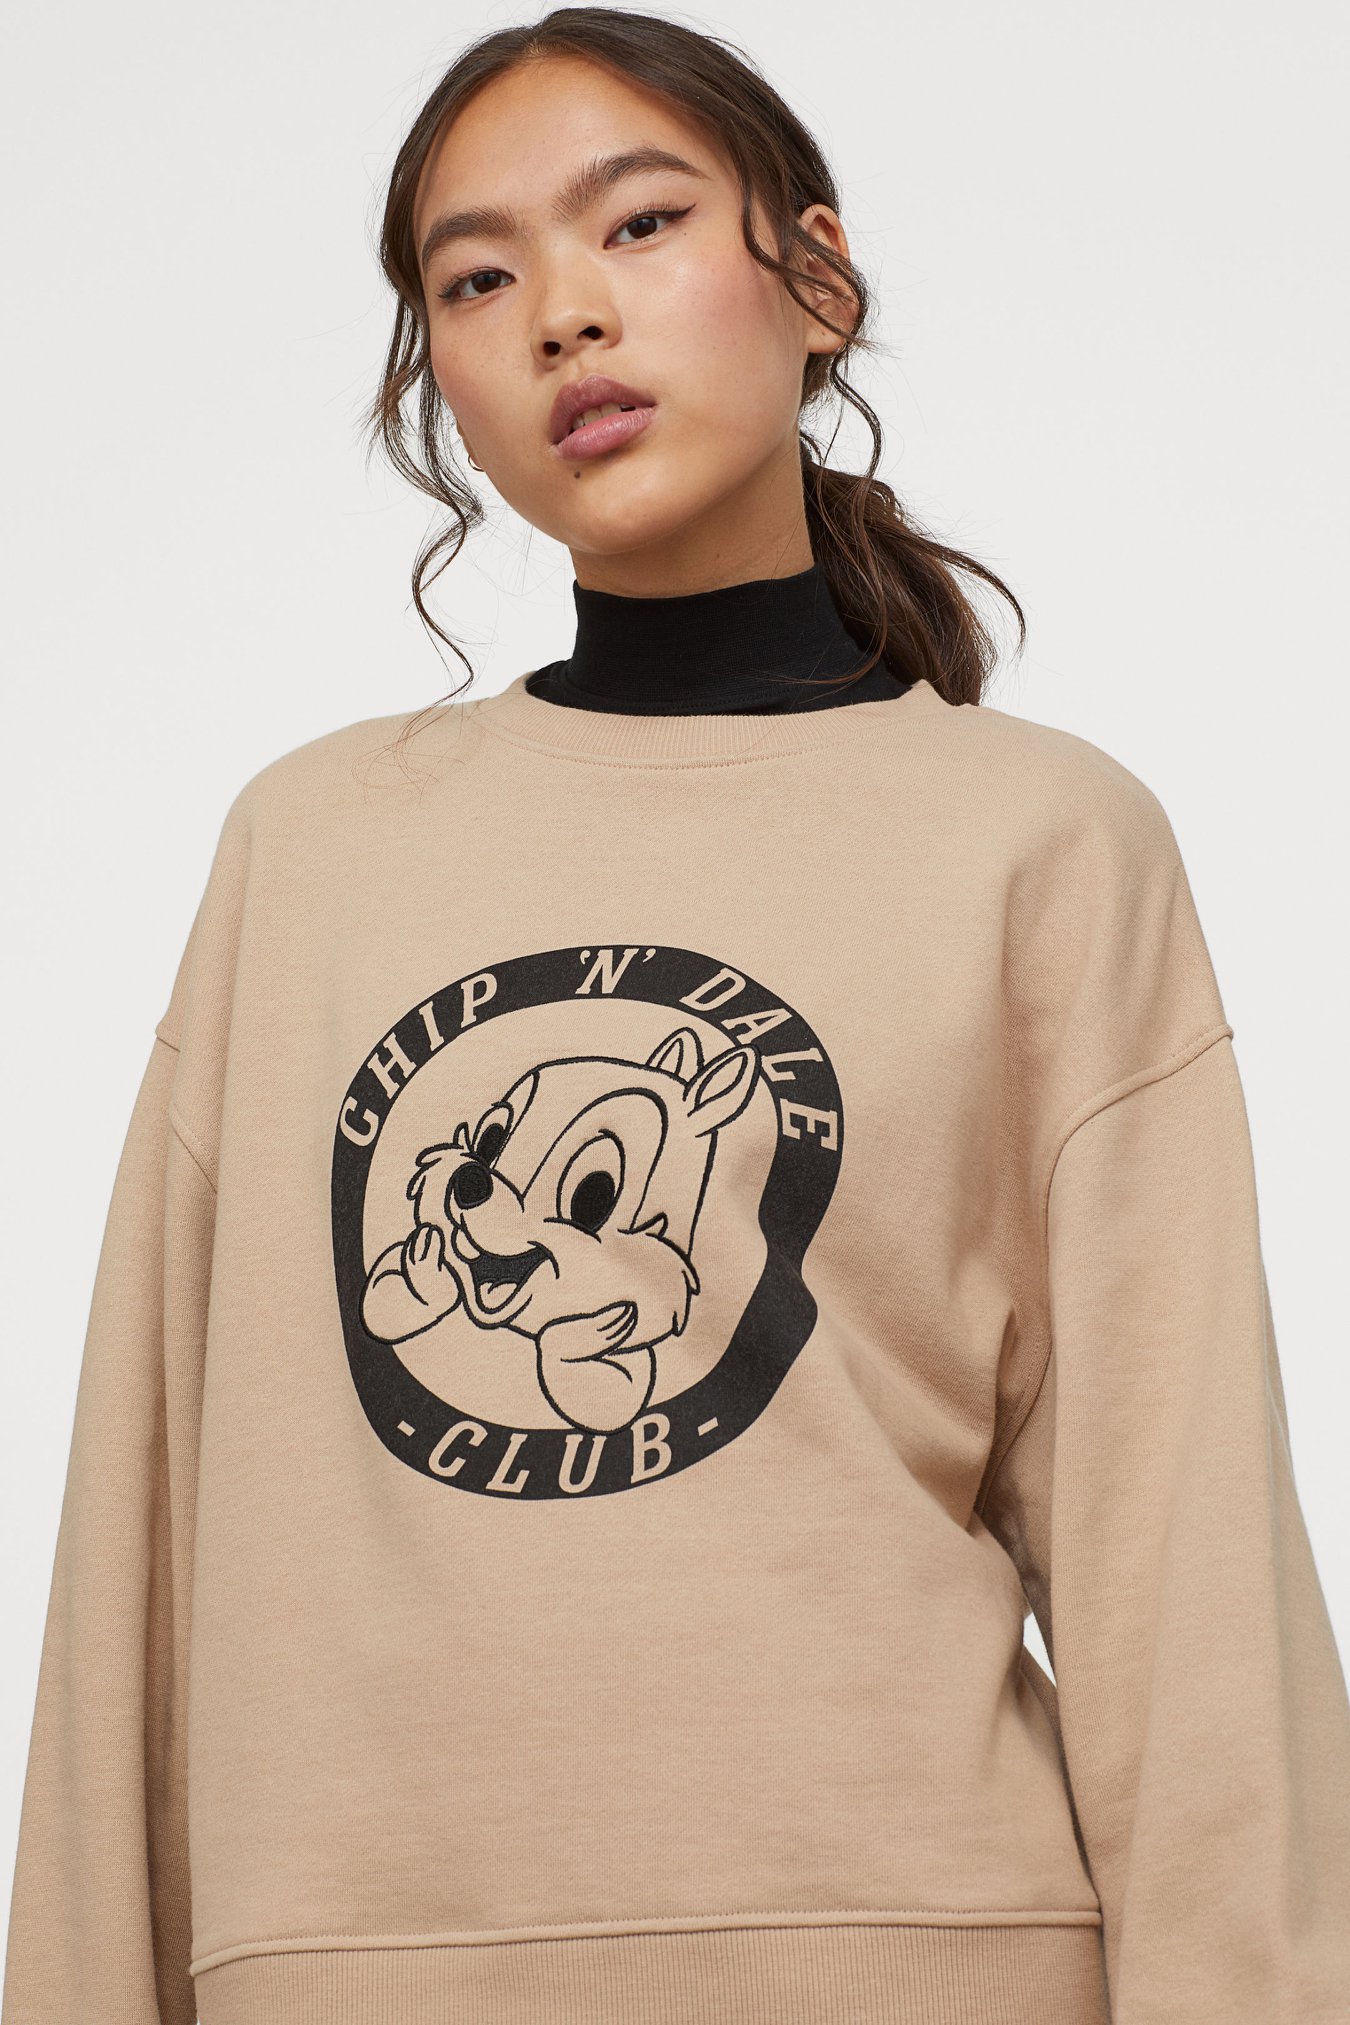 The first Autumn drop 🍂 of the Asia-inspired collection features the beloved Disney classics CHIP 'N' DALE 🐿️🐿️ - prints in mischievous 🤪 and playful expressions, together with shades of beige, stripes and plaids for that modern stylish look. The new #HMDivided collection is available exclusively in stores now! ❤️ #HMhongkong #HMmacau #InStoreOnly